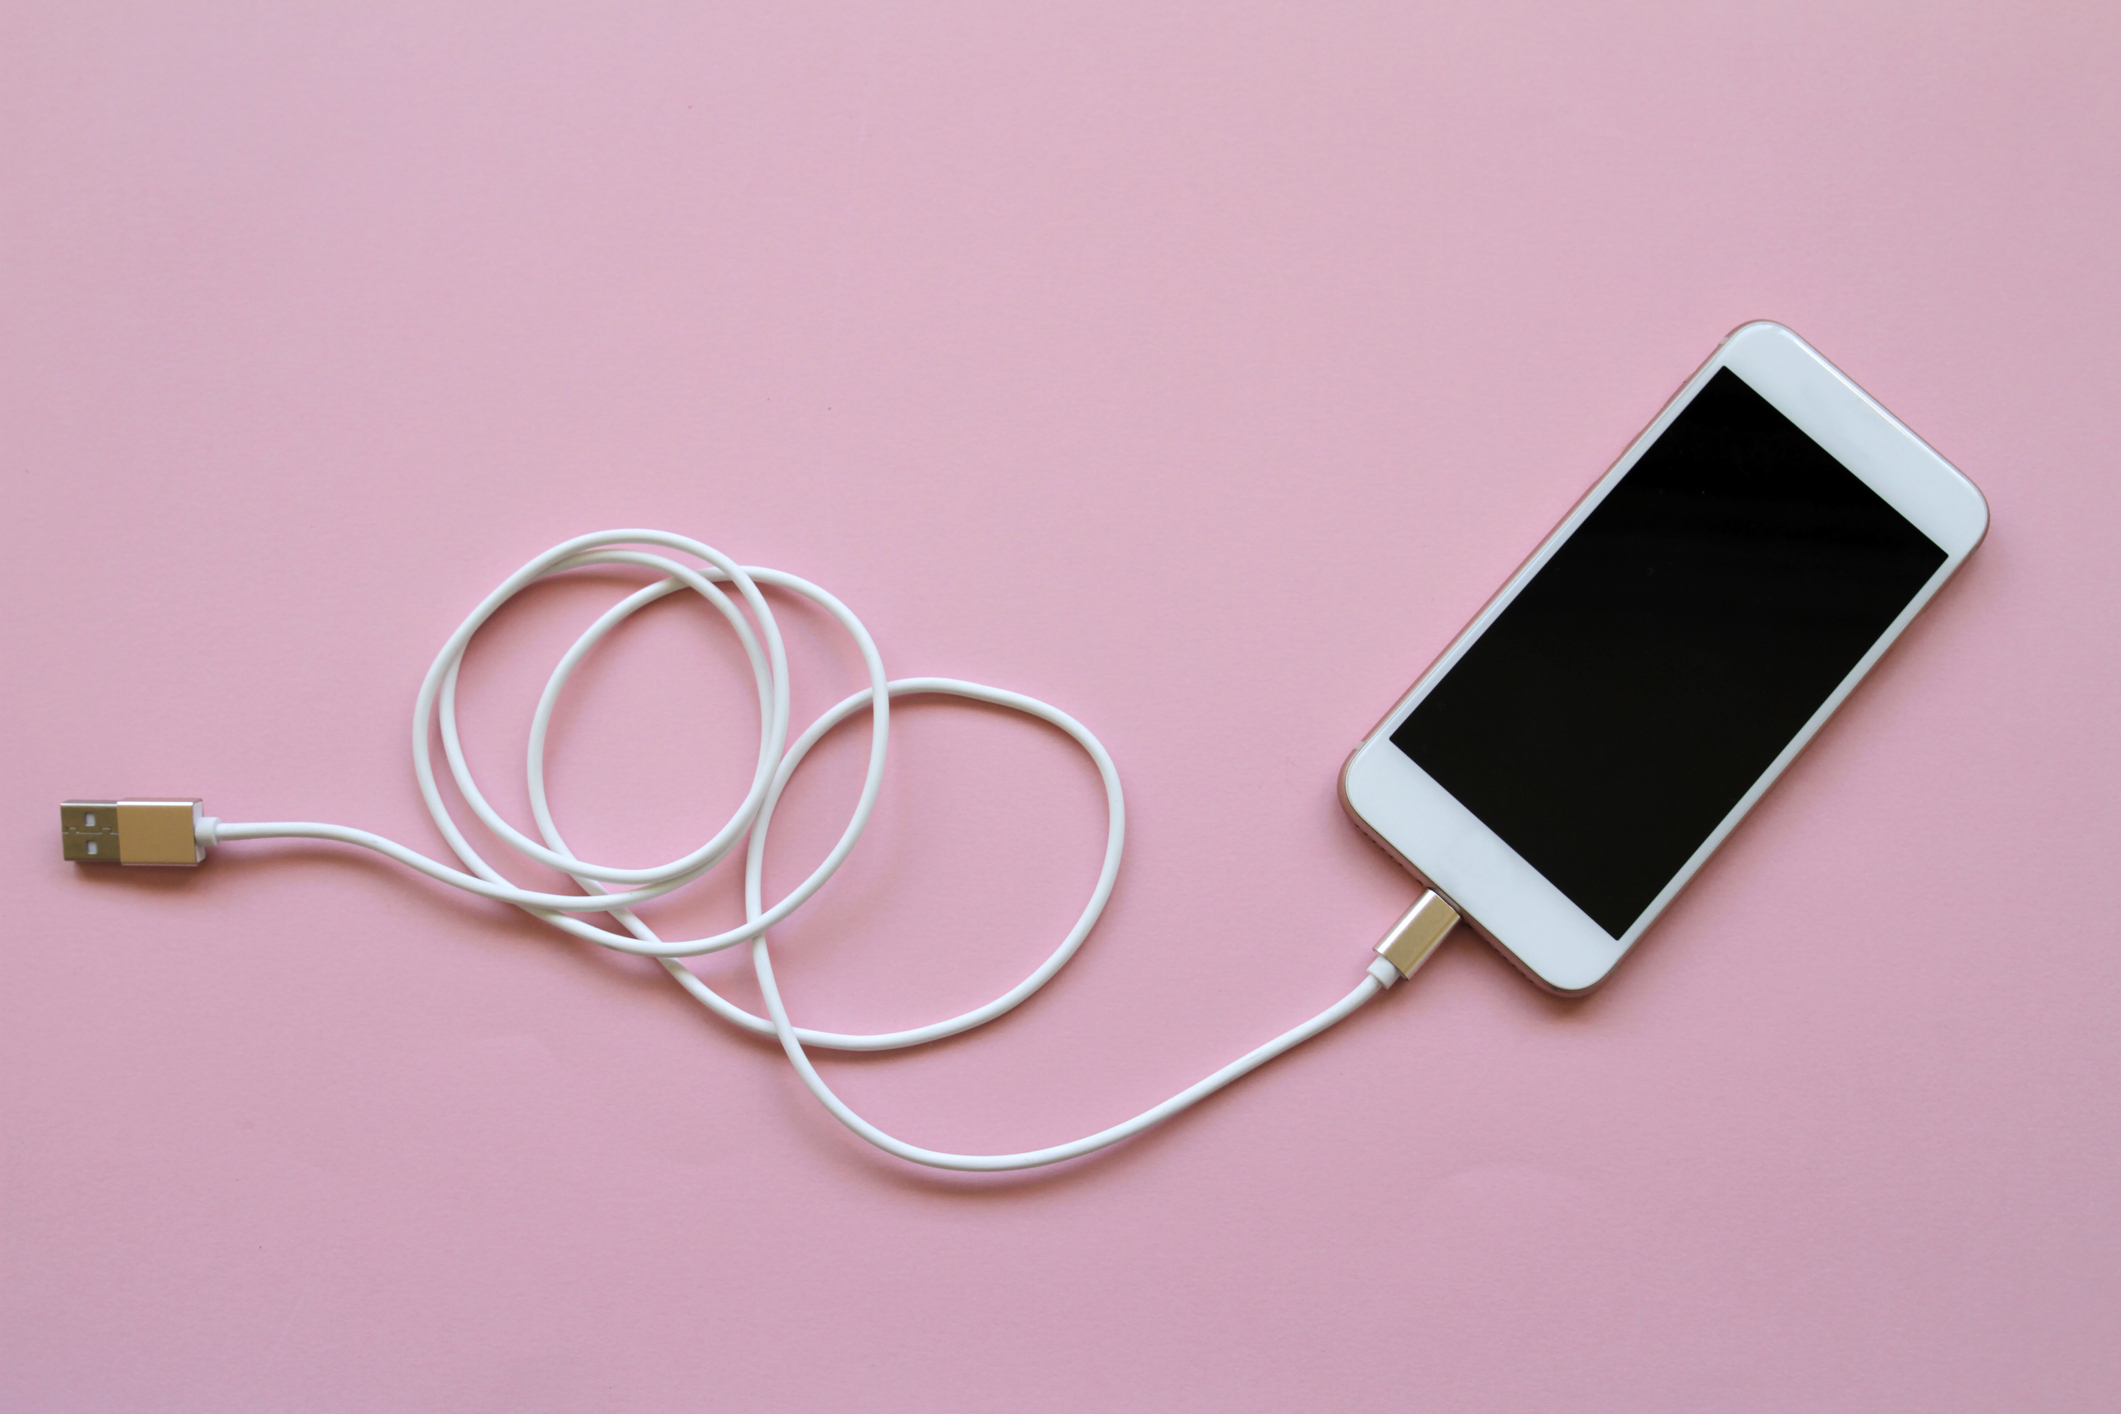 smartphone lying face up on a pink background with a charging cable attached